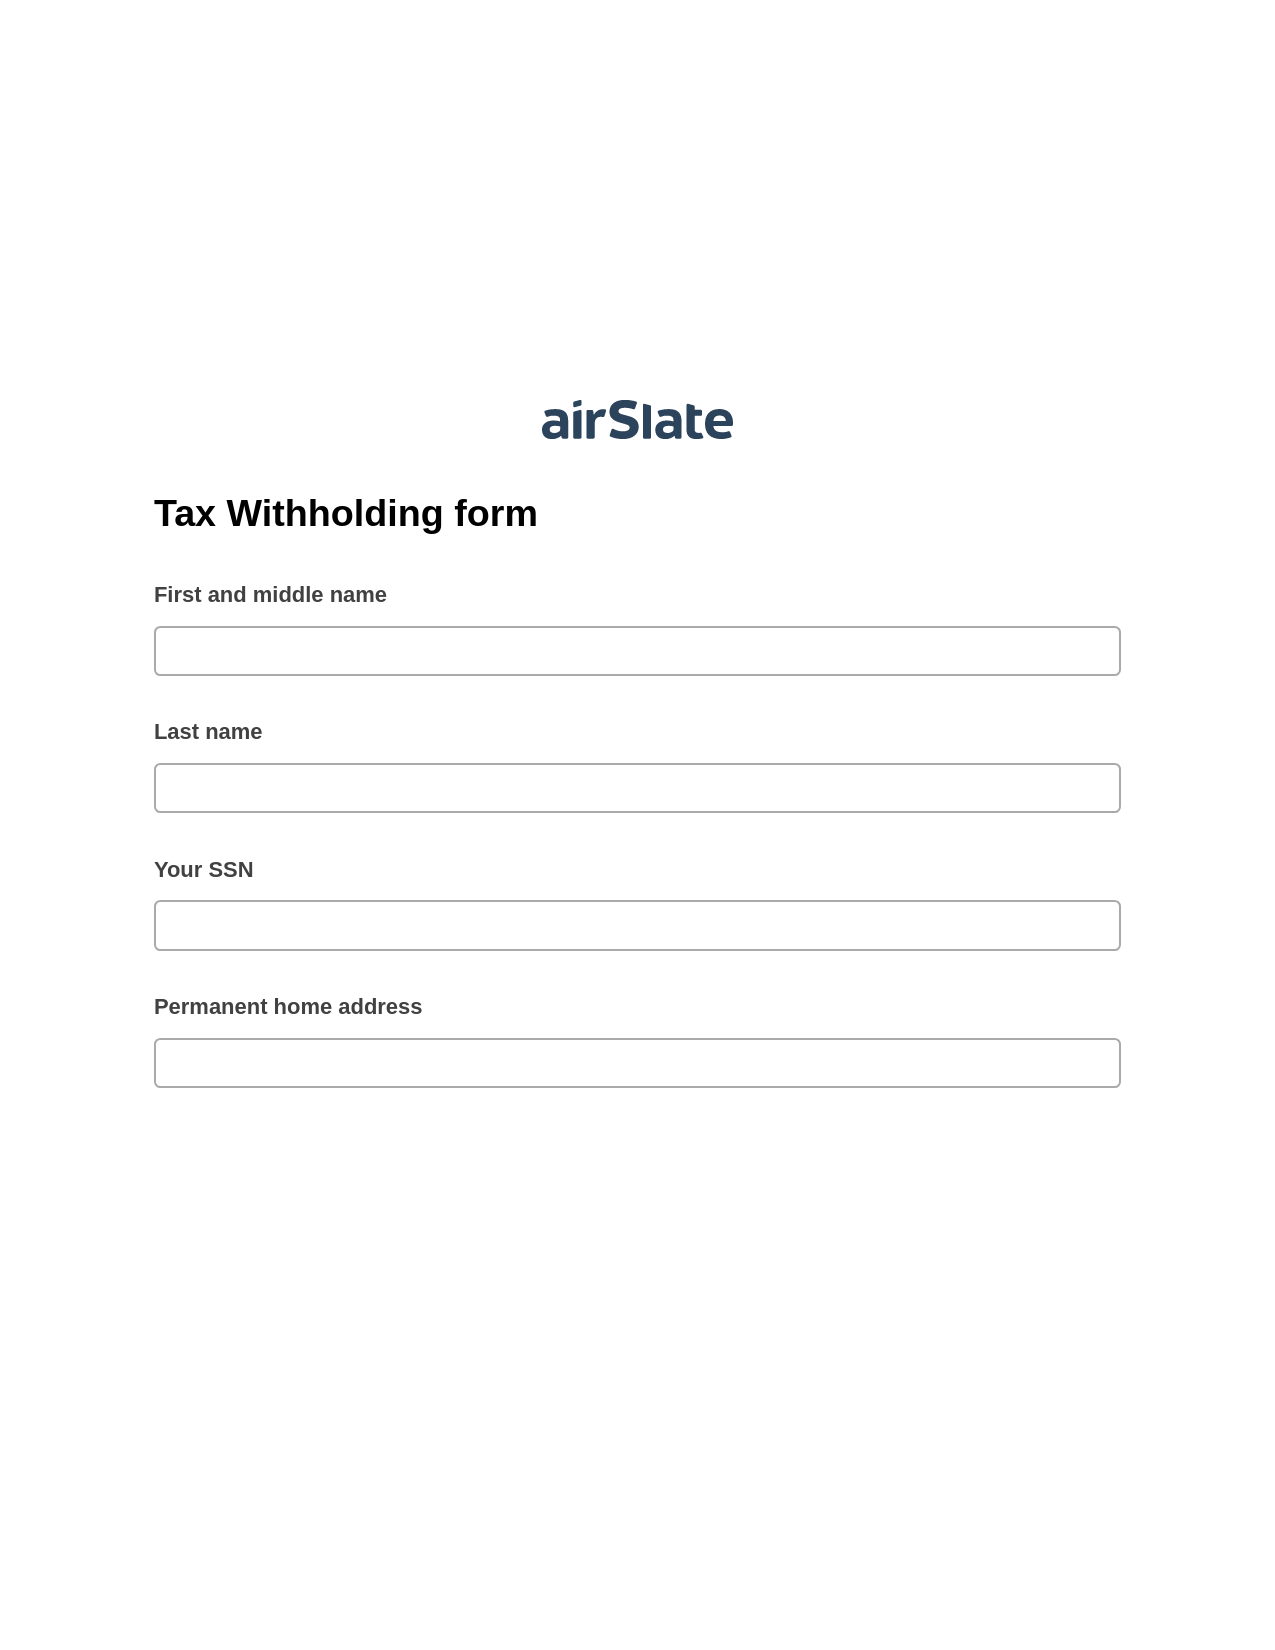 Multirole Tax Withholding form Pre-fill from Excel Spreadsheet Bot, Google Calendar Bot, Dropbox Bot